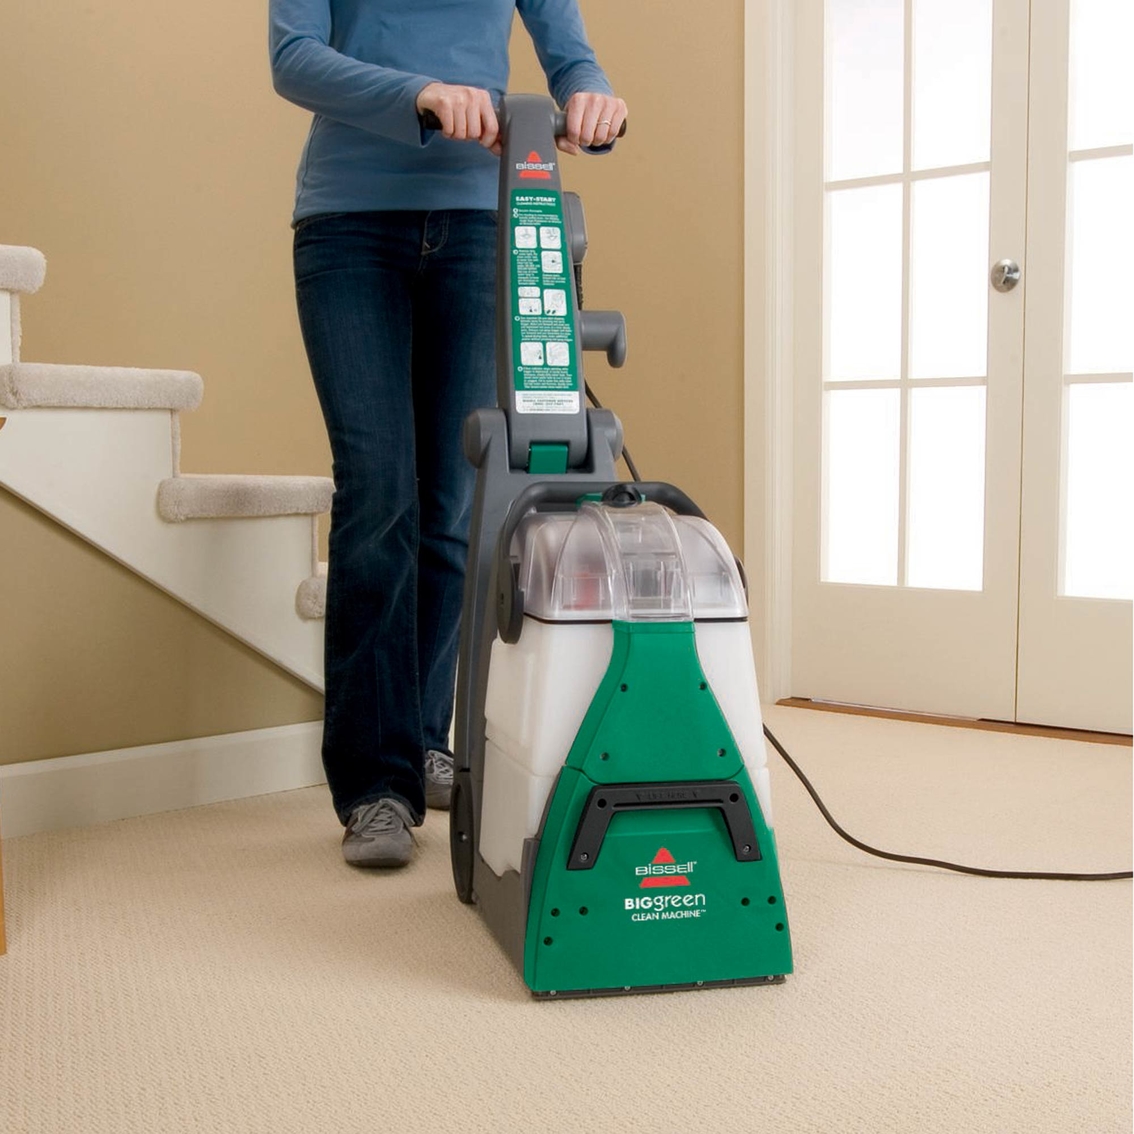 Bissell Big Green Machine Professional Carpet Cleaner, Carpet Cleaners, Furniture & Appliances